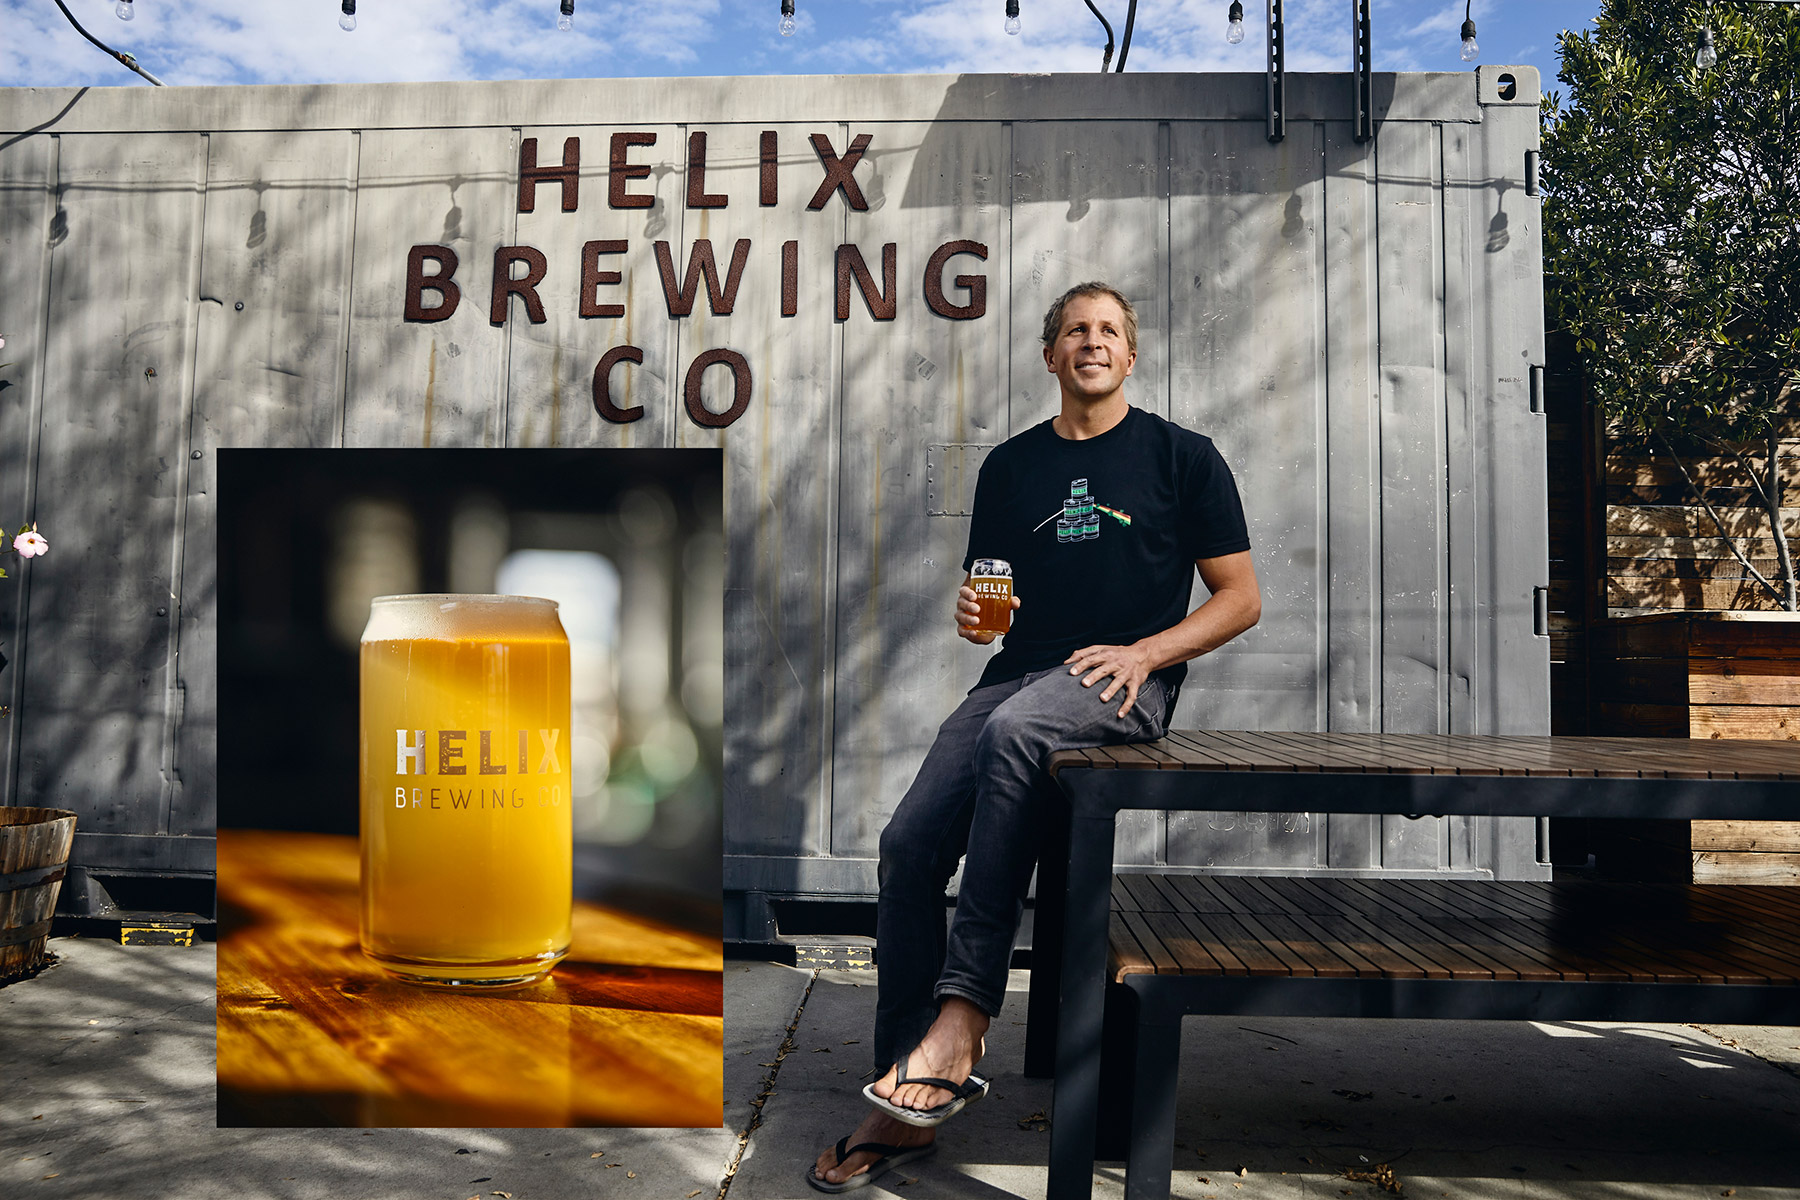 Helix Brewing Co